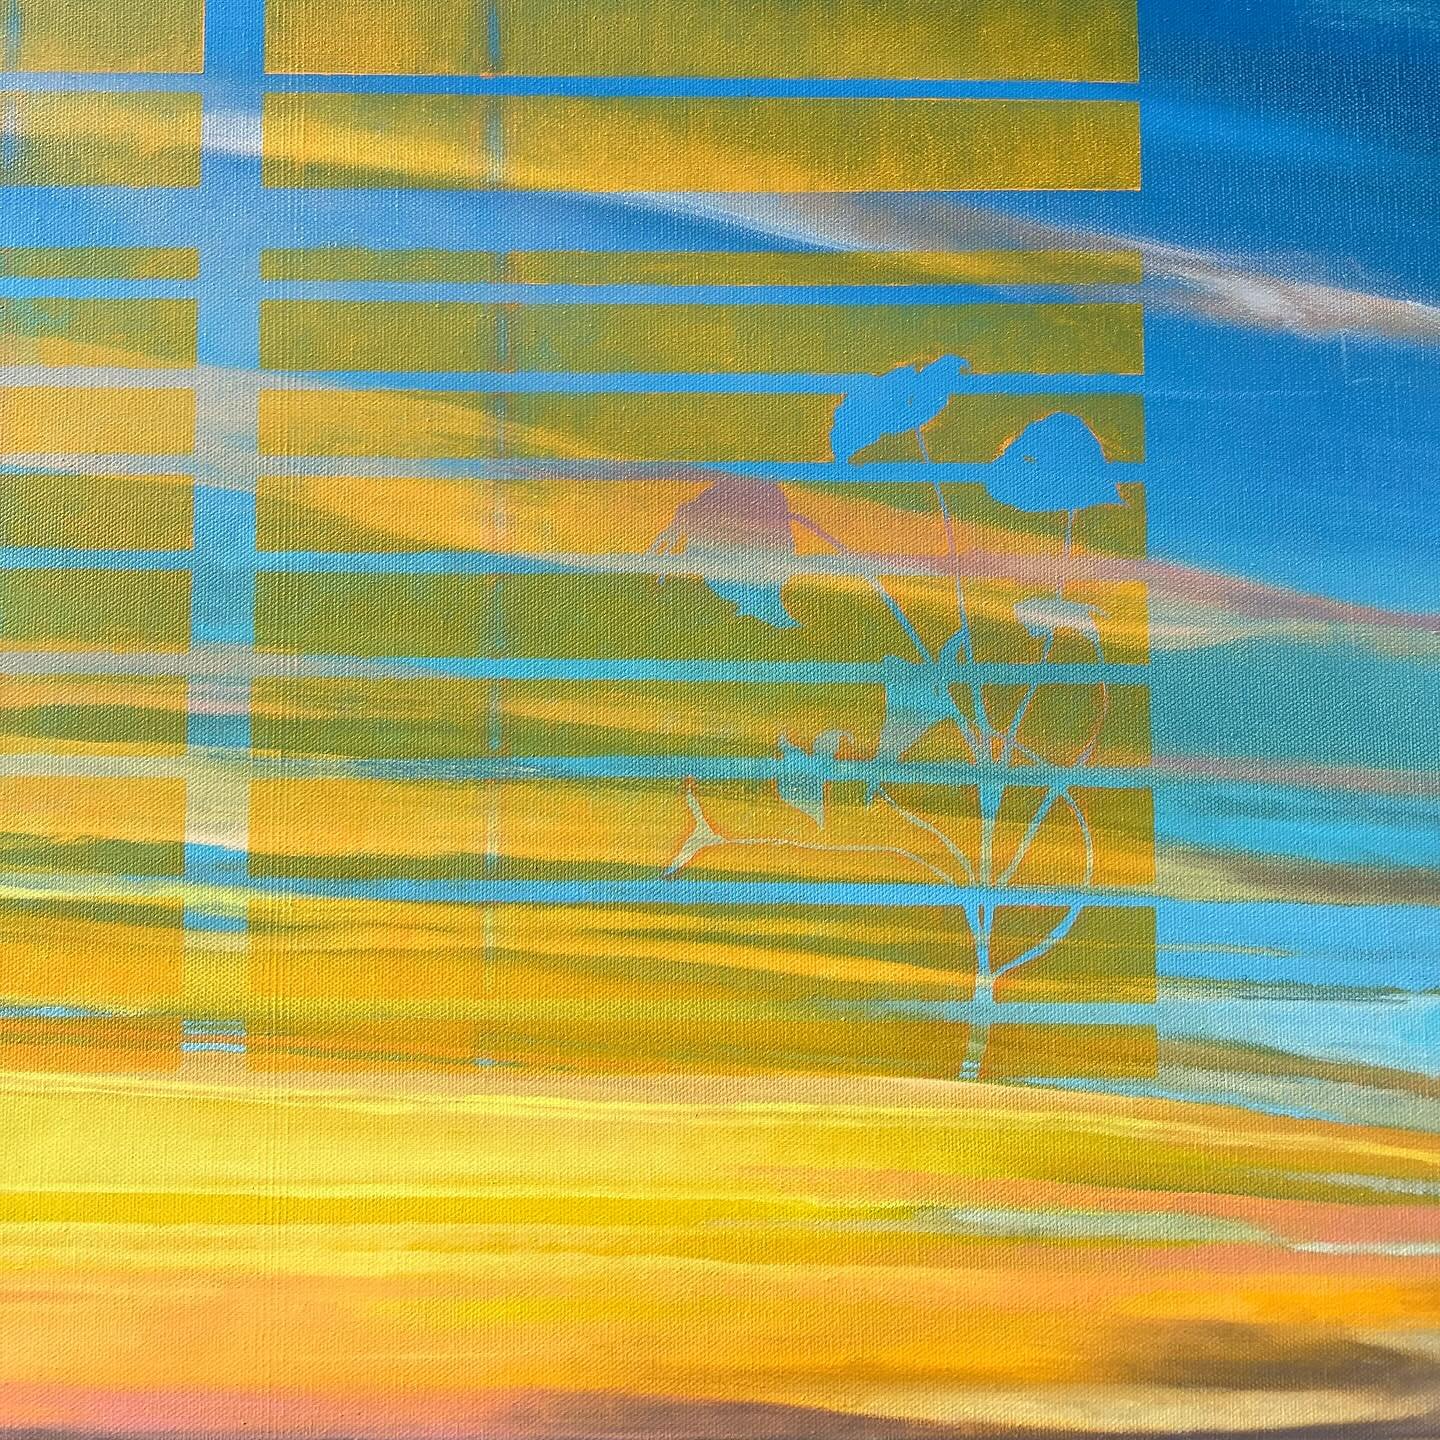 This is the last week to see this painting at the LaGrange Art Museum as part of the Fifth LaGrange Southeast Regional Exhibition 🌞☁️

&ldquo;Sifting the Sky into Layers&rdquo; , 40x30 inches, oil on canvas. $1,400. Purchase through the LaGrange Art